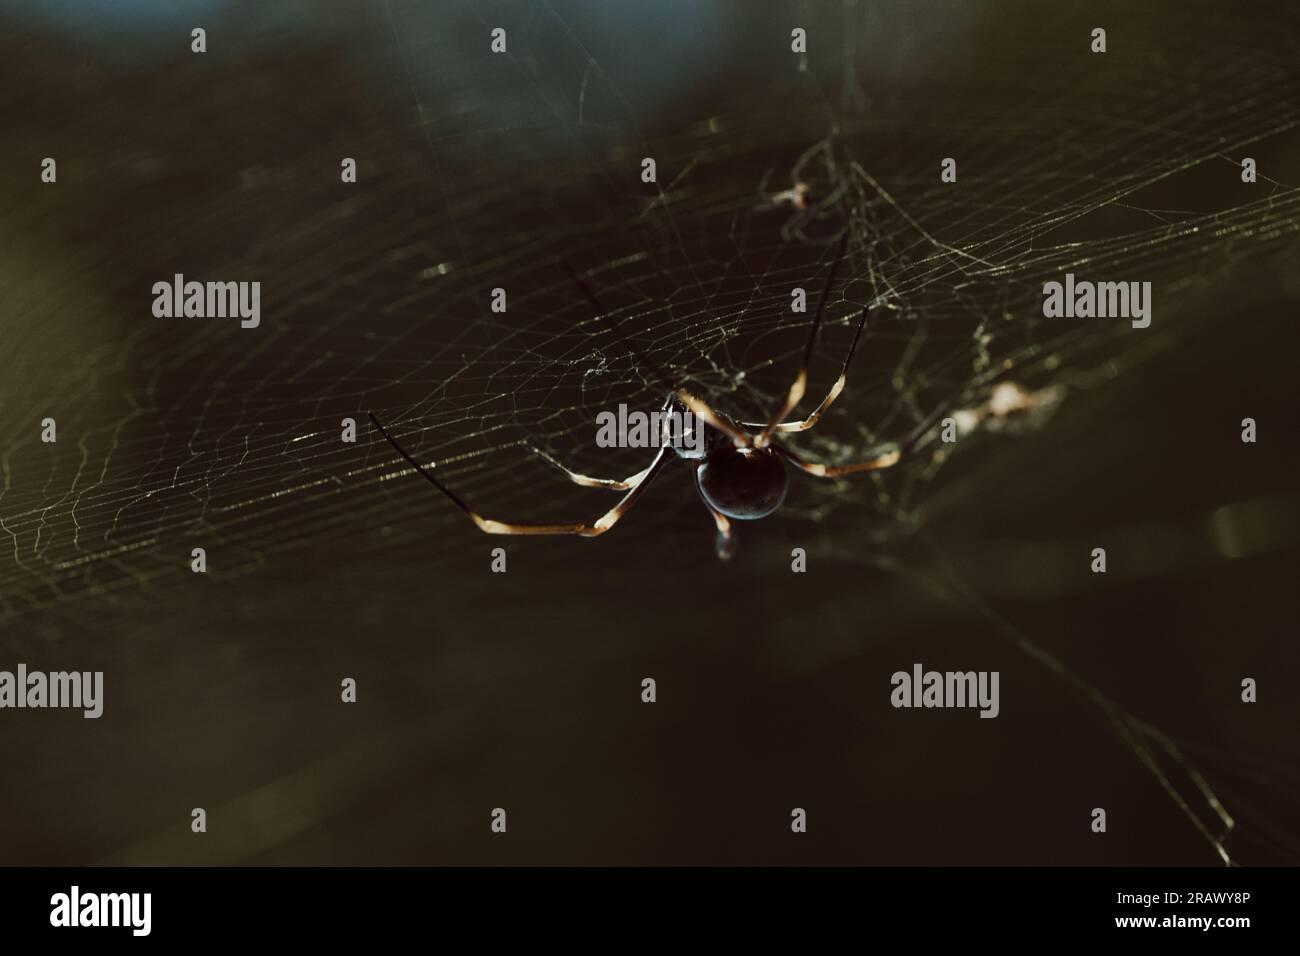 A spider delicately weaves its intricate web, showcasing its remarkable craftsmanship and natural beauty. Stock Photo